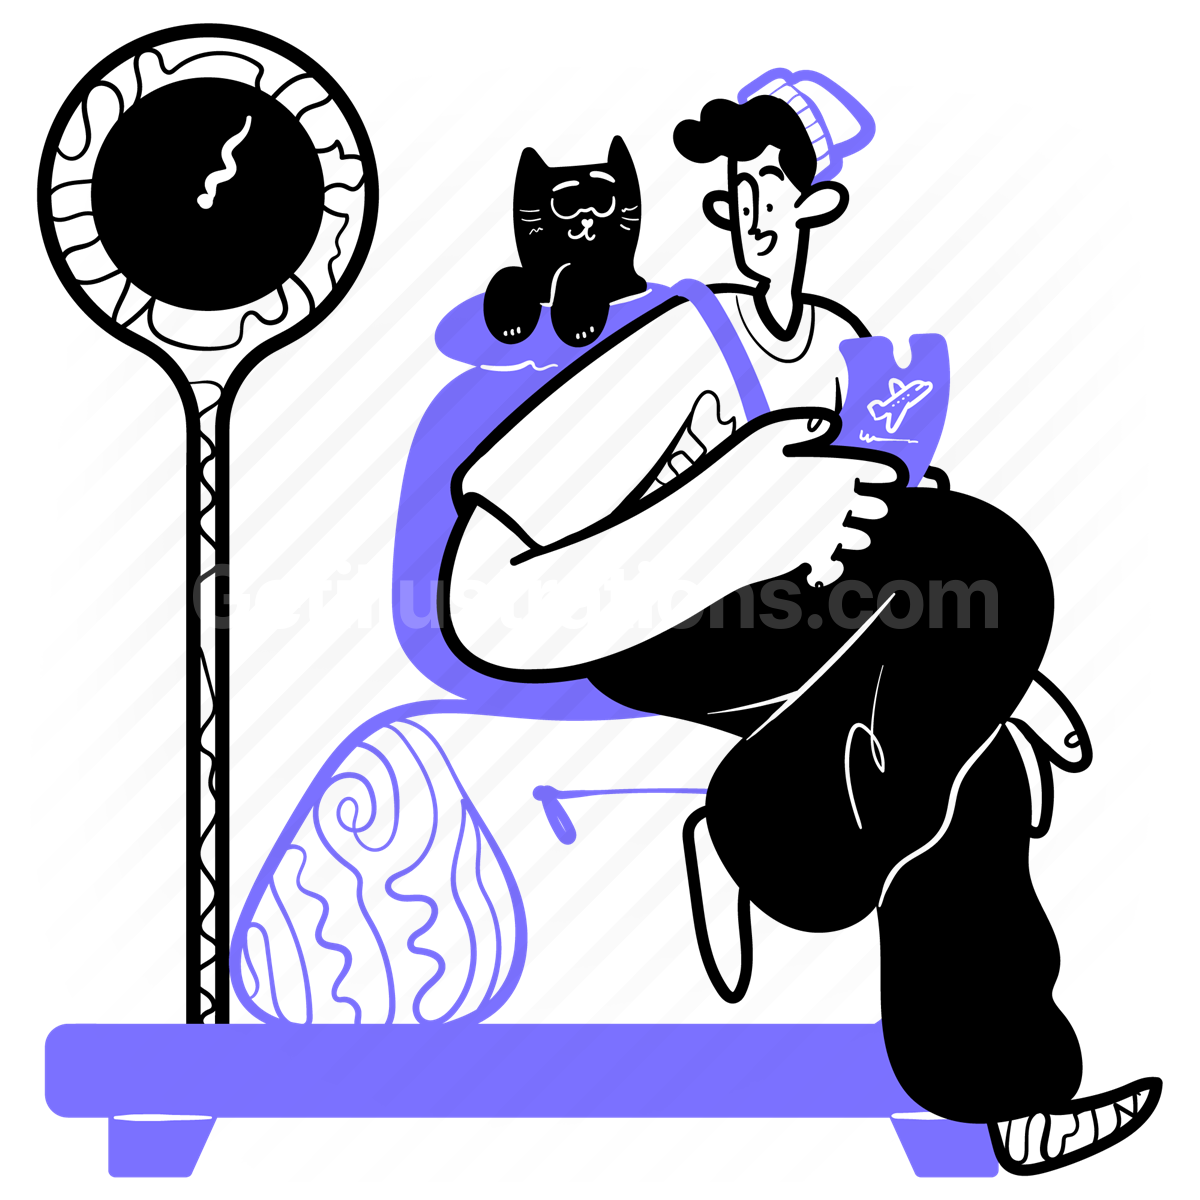 travelling, holiday, vacation, weight, measure, measurement, scale, man, cat, airport